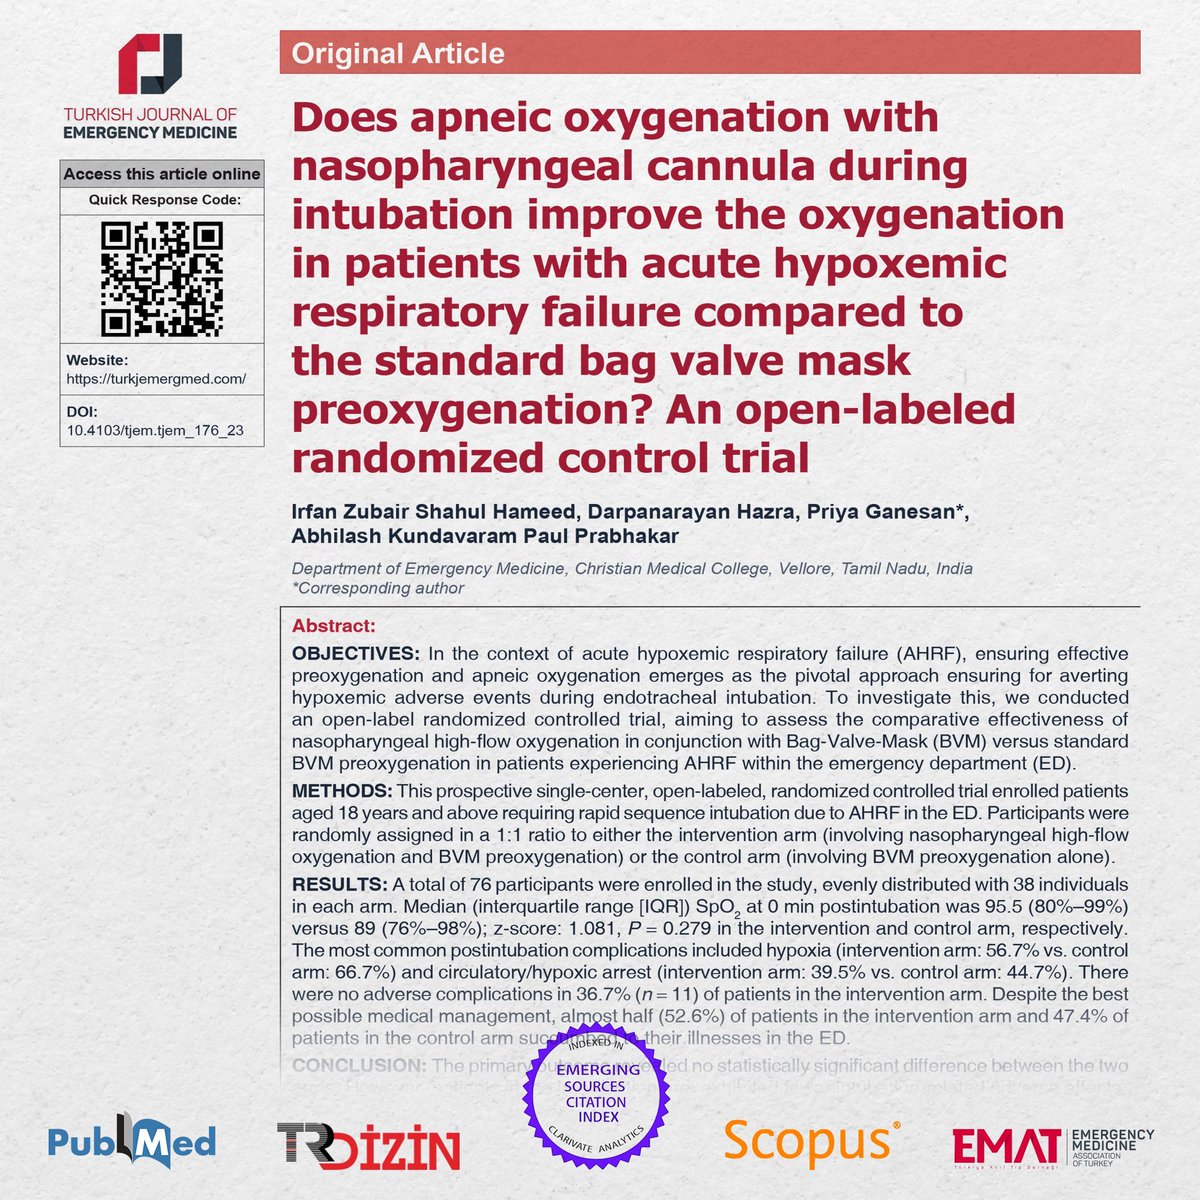 Article from 2024/1: Hameed et al. Does apneic oxygenation with nasopharyngeal cannula during intubation improve the oxygenation in patients with acute hypoxemic respiratory failure... #TurkJEmergMed #FOAMed #MedEd #EmergencyMedicine #OriginalArticle To: buff.ly/3OkDPUk